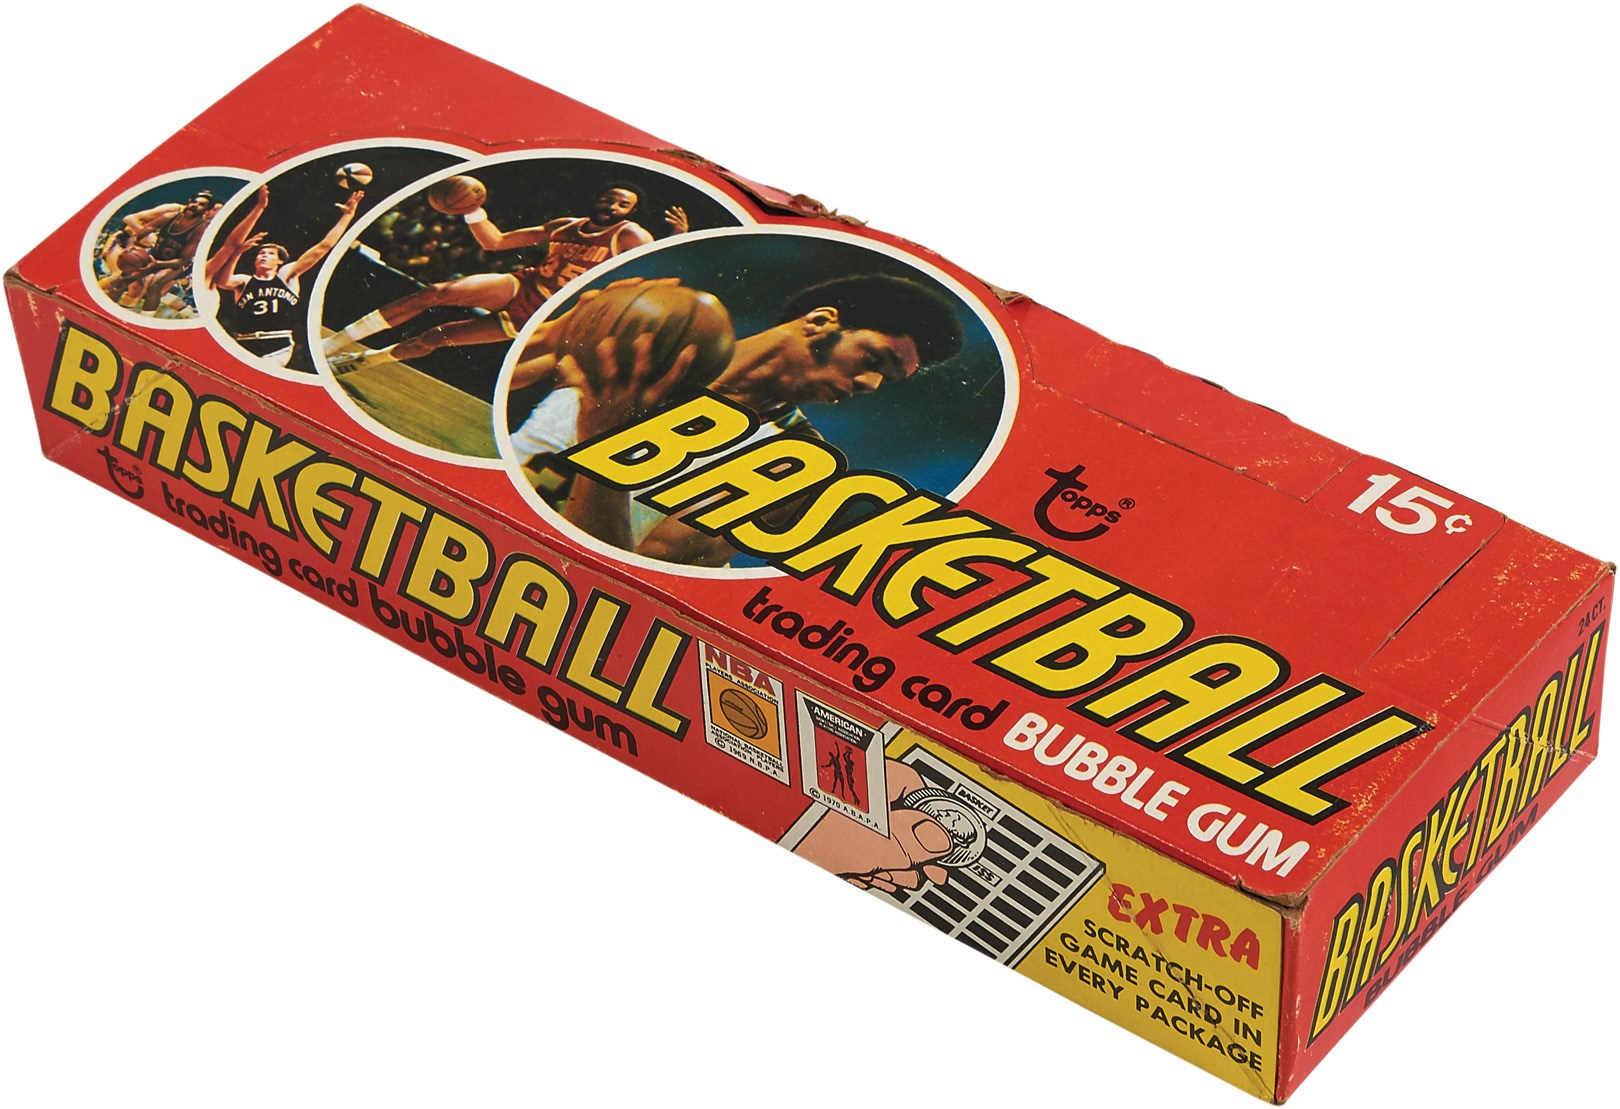 Baseball and Trading Cards - 1974 Topps Basketball Near Complete Wax Box with 22 Unopened Packs